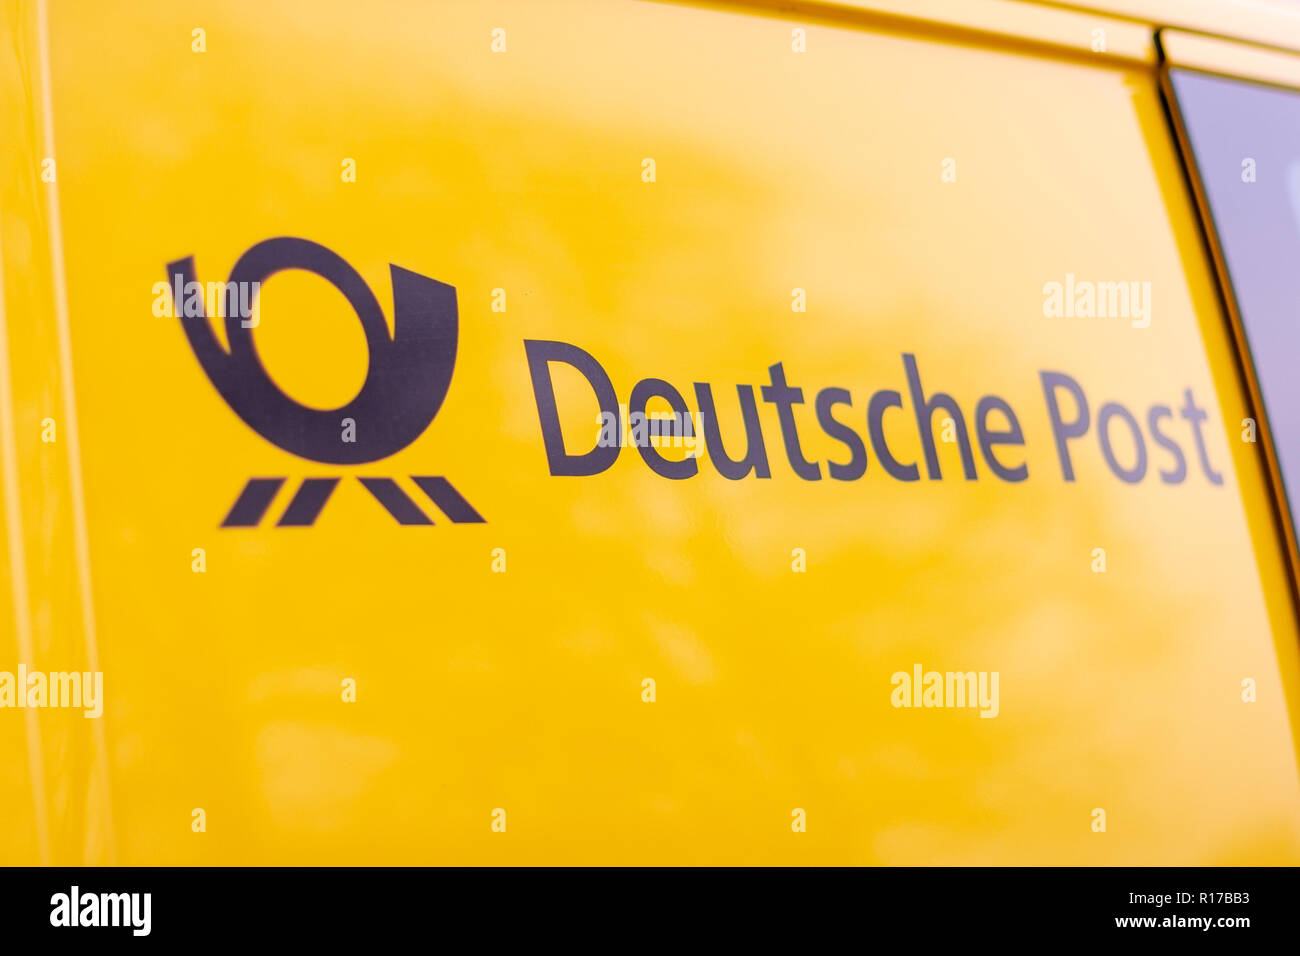 BERLIN / GERMANY - NOVEMBER 9,2018: Logo from Deutsche Post and DHL on yellow postcar. Stock Photo